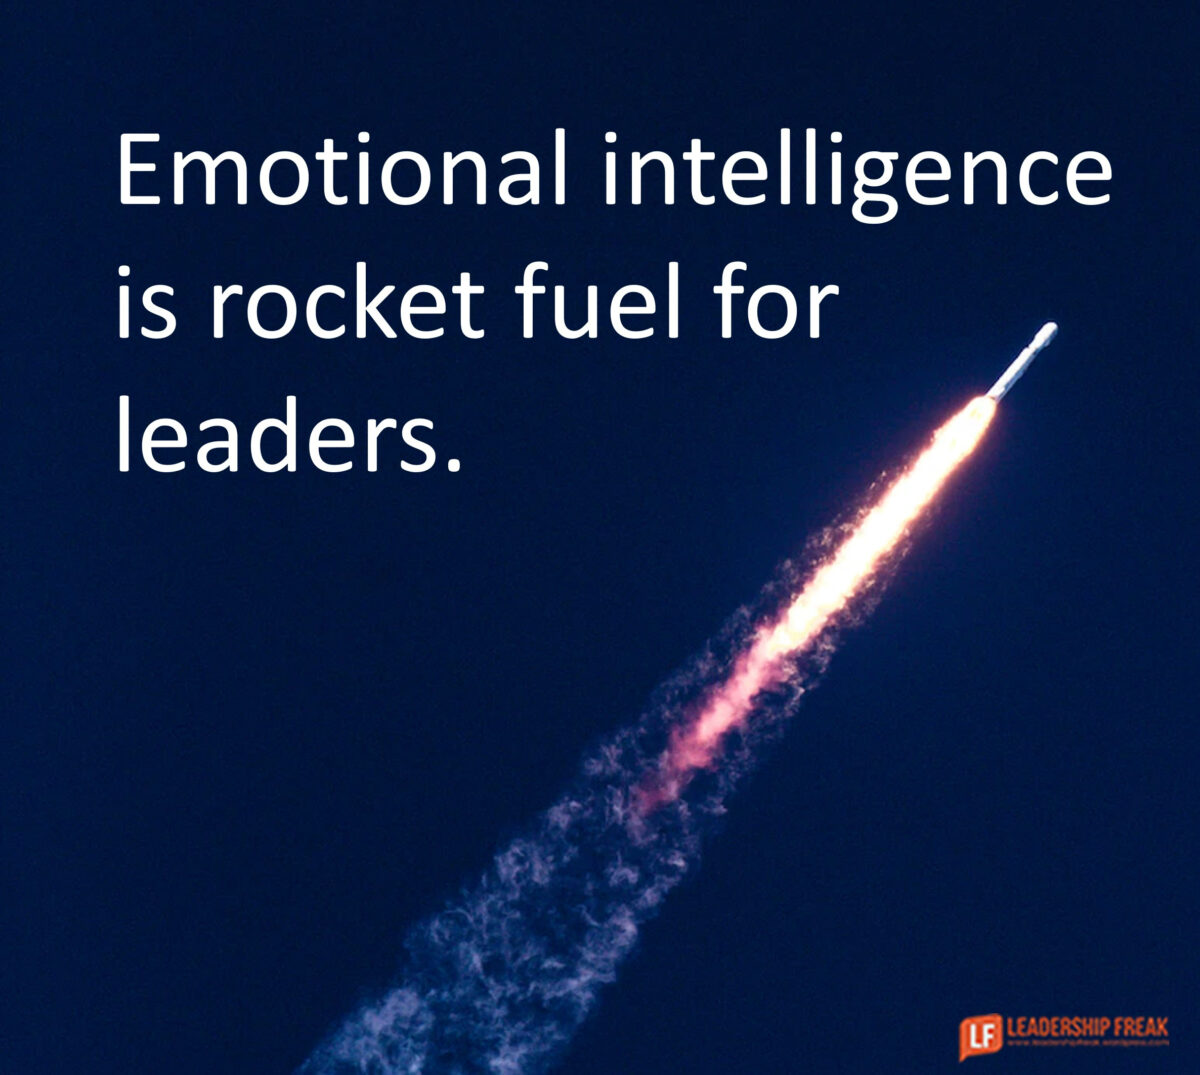 3 Emotional Intelligence Practices for Busy Leaders